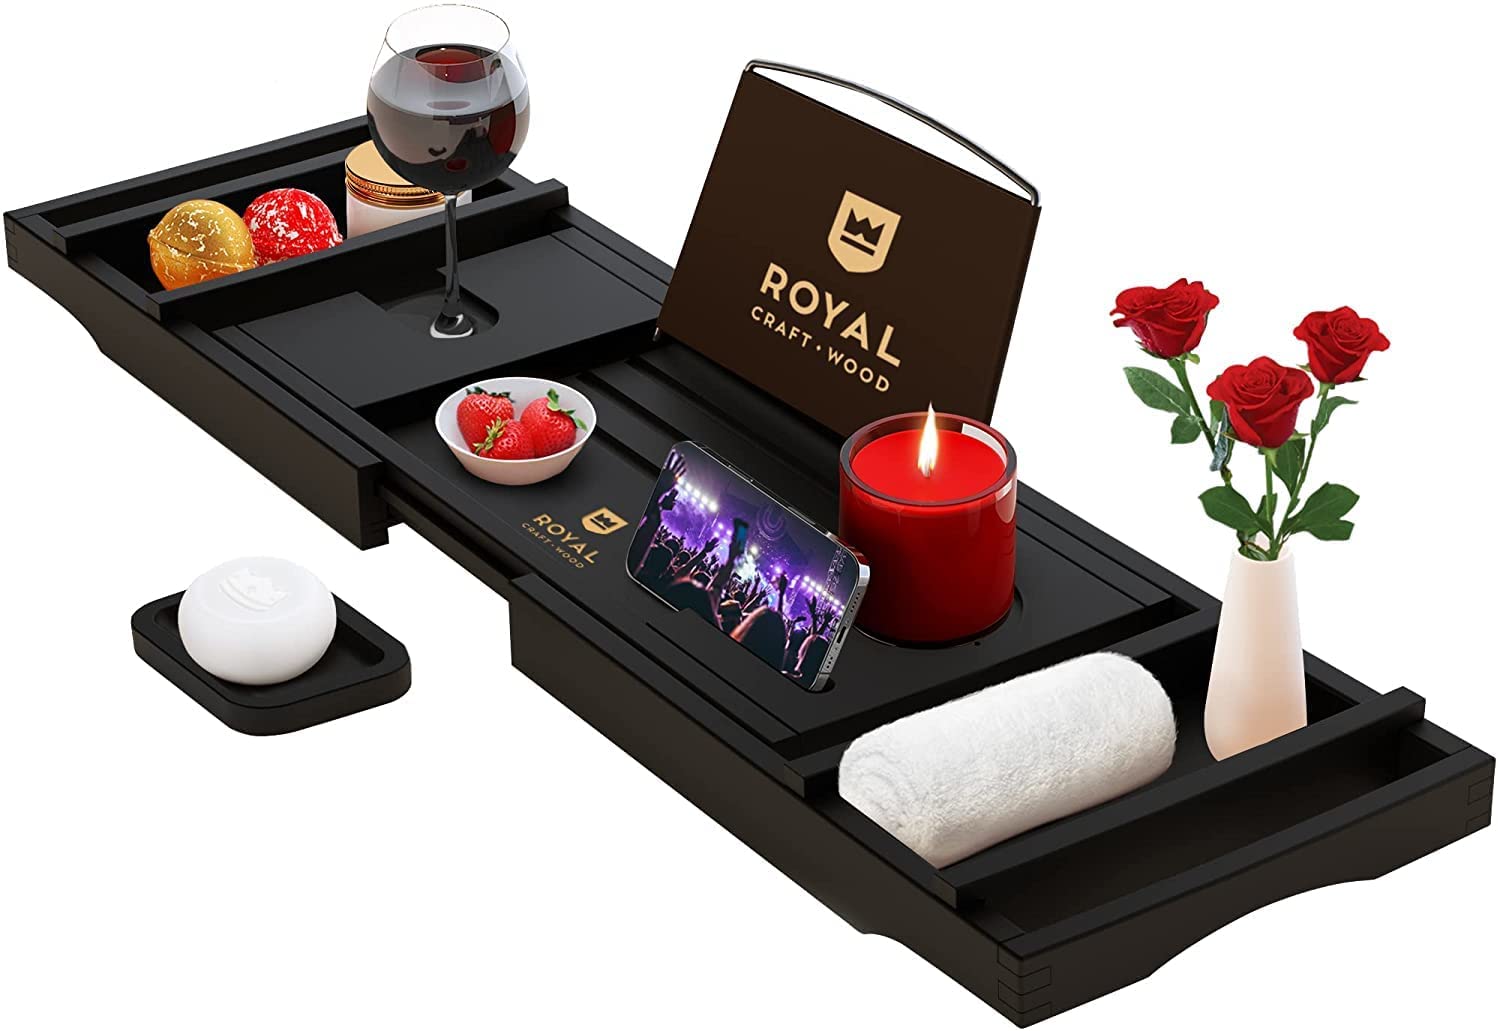 ROYAL CRAFT WOOD Luxury Bathtub Caddy Tray, One or Two Person Bath and Bed Tray, Bonus Free Soap Holder (Black Bamboo Color) - image 1 of 6